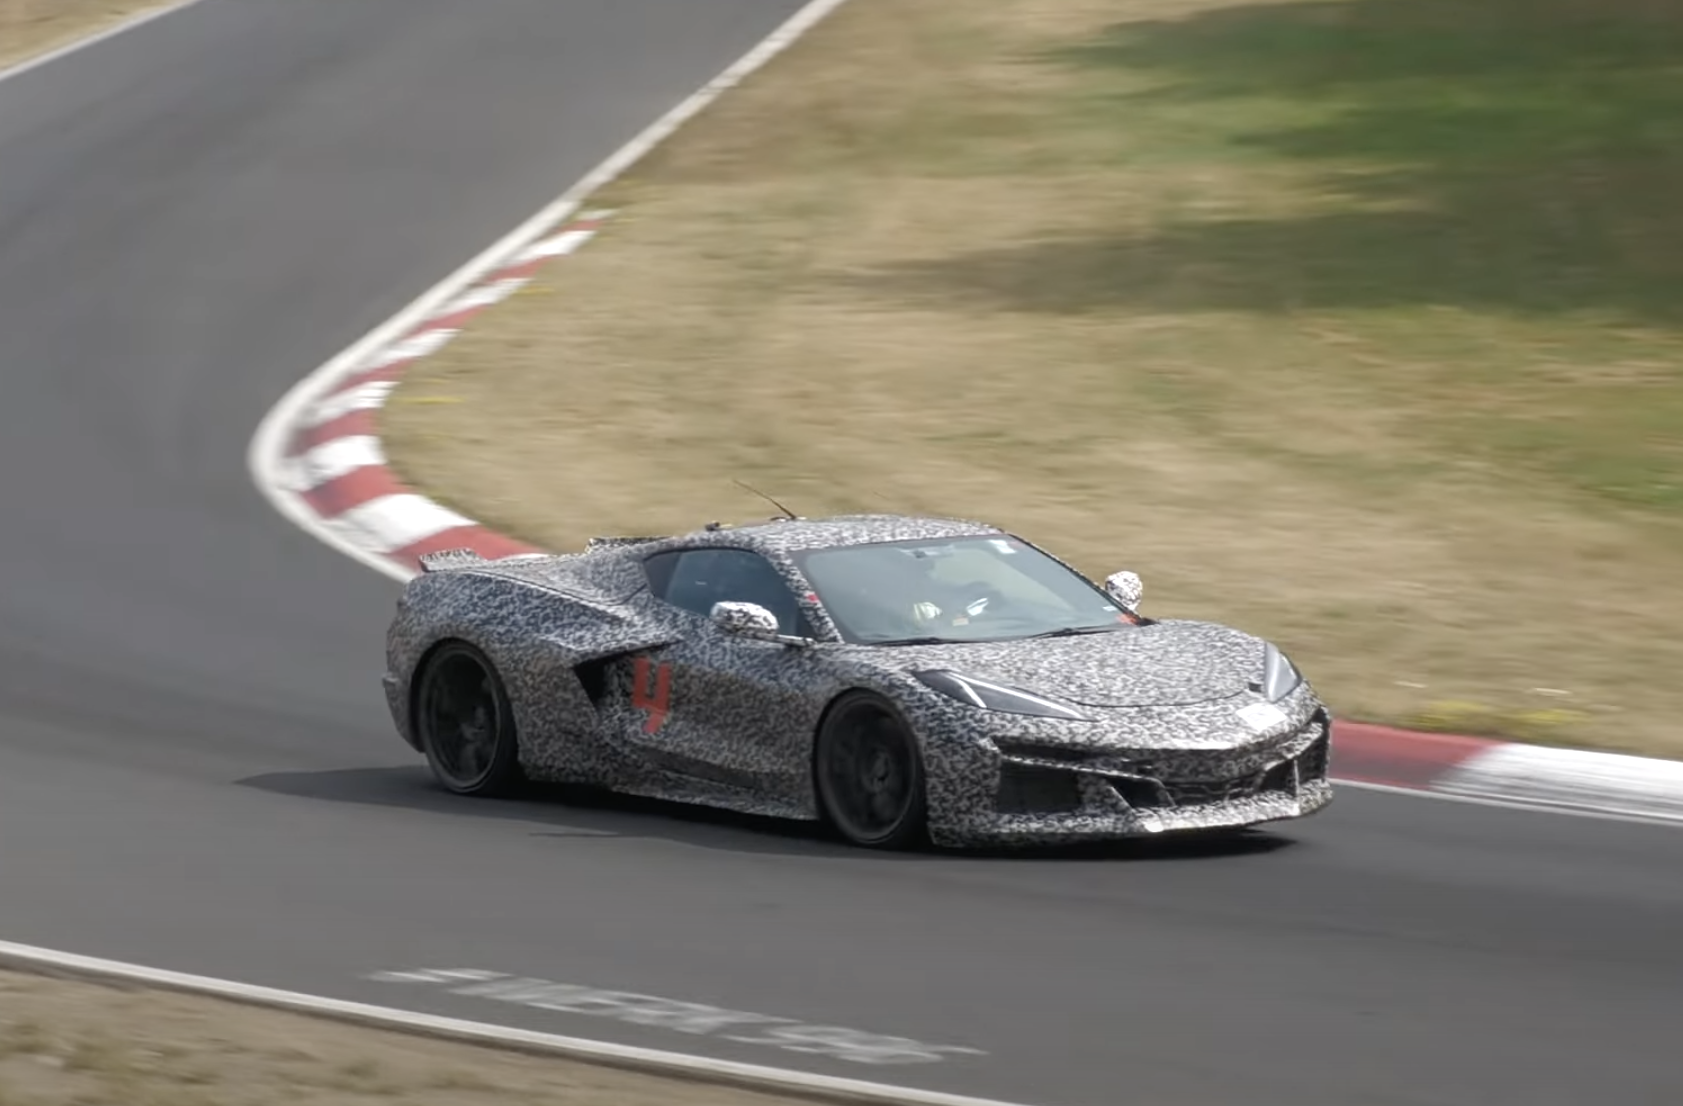 Hybrid Corvette E-Ray Spotted Making Laps At Nurburgring